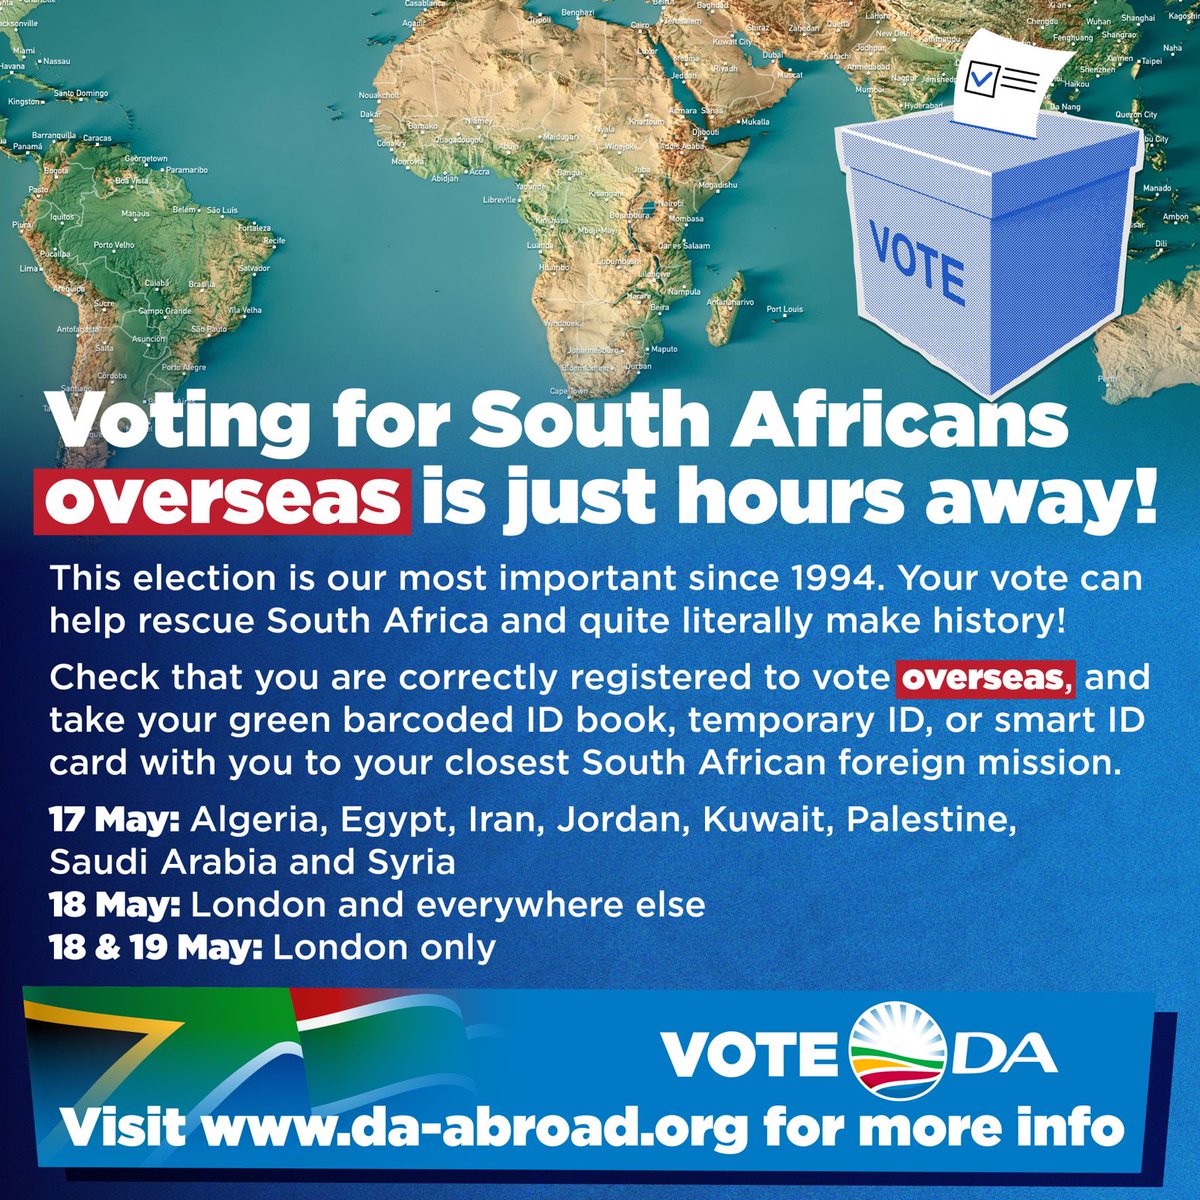 🚨 SHARE: Voting for South Africans overseas is just hours away! Your vote can #RescueSA. 🗓️ 17 May: Algeria, Egypt, Iran, Jordan, Kuwait, Palestine, Saudi Arabia and Syria 🗓️ 18 May: London and everywhere else 🗓️ 18 & 19 May: London ℹ️For more: da-abroad.org #VoteDA